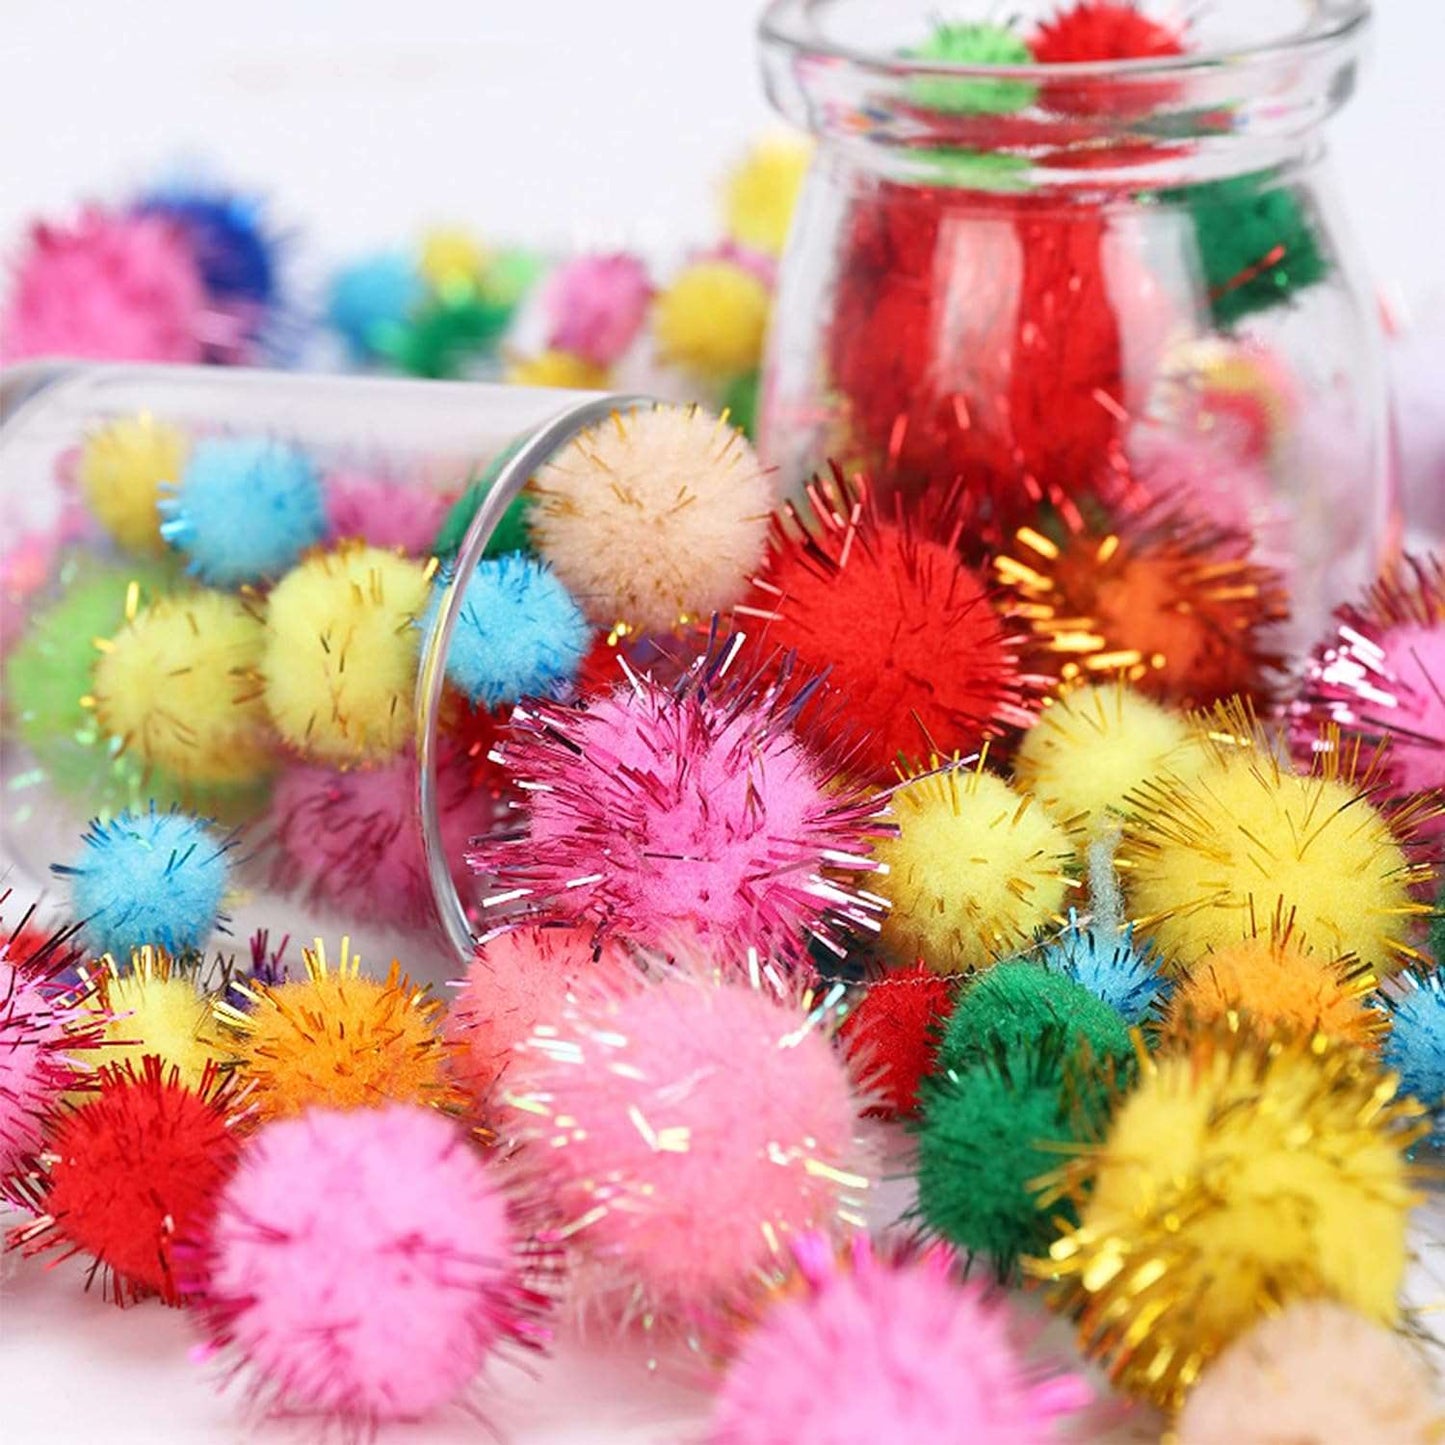 kutkutstyle Toys KUTKUT 50 Pcs 3cm Sparkle Ball Cat Toy Interactive Balls Multicolor for Kittens Exercise and Multiple Cats Play and Chase Cat's Favorite Toy Ball Tinsel Pom Poms Glitters